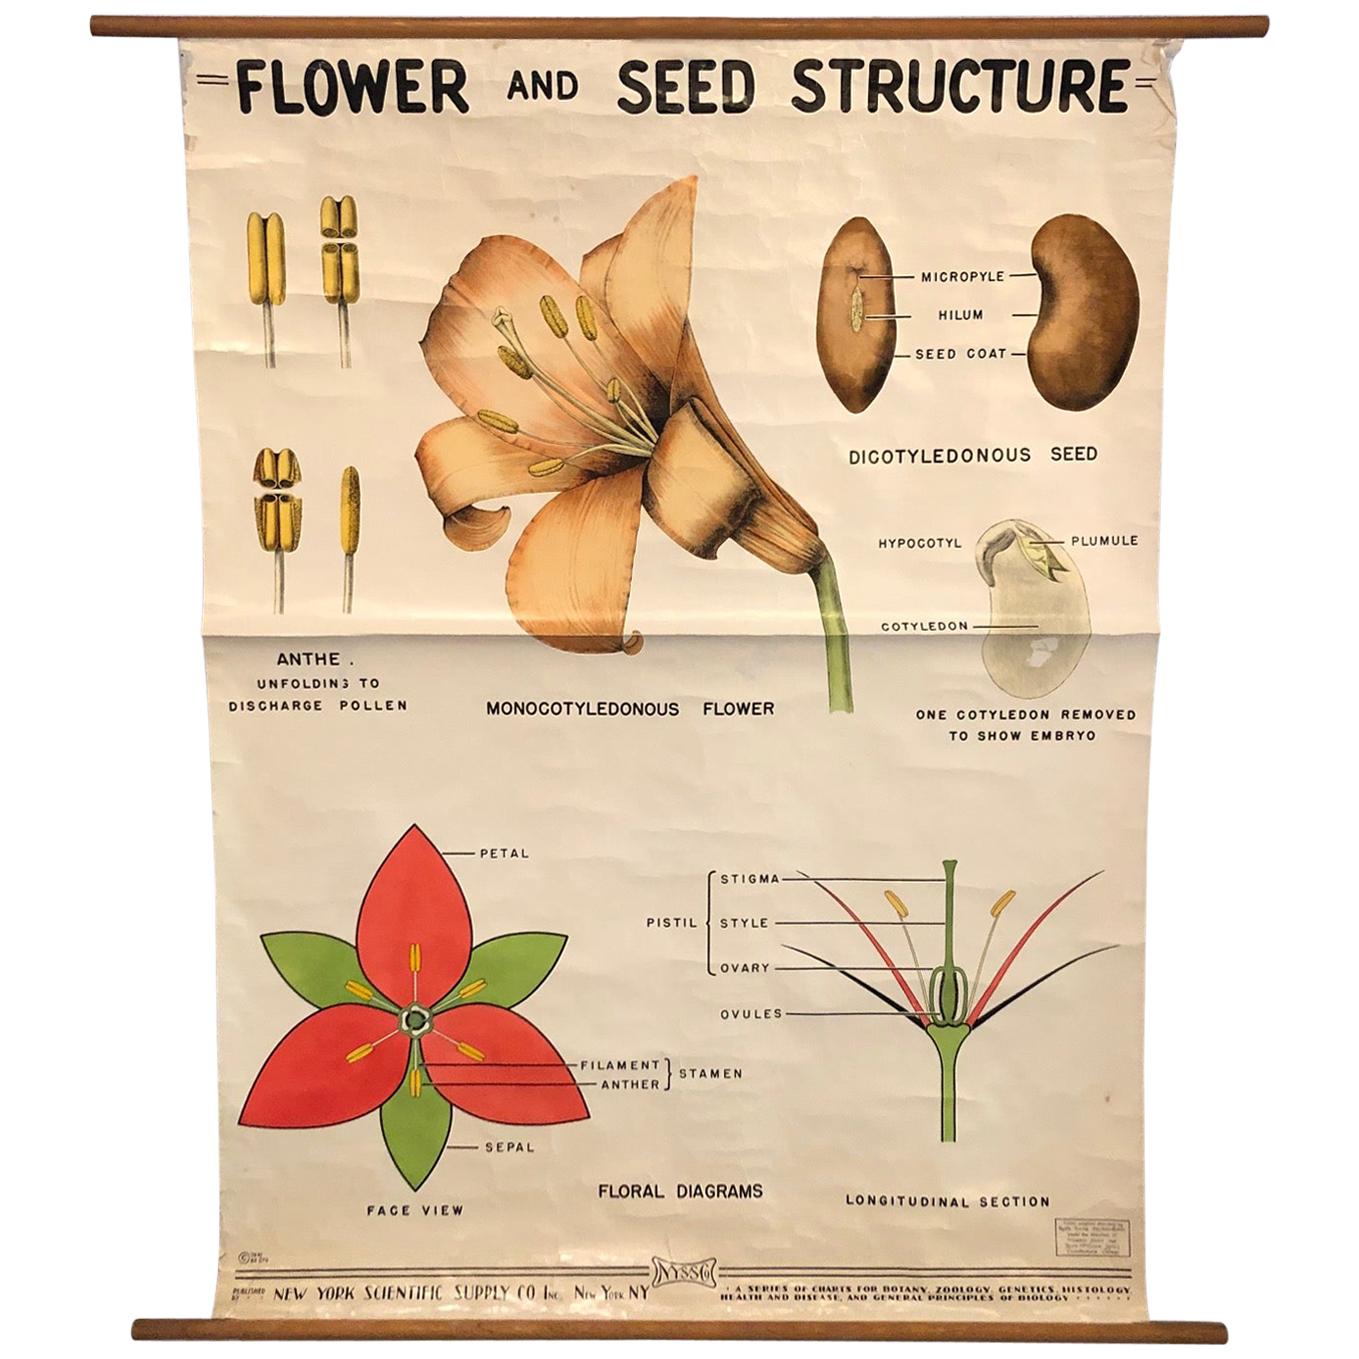 Educational Flower And Seed Botanical Chart by New York Scientific Supply Co.